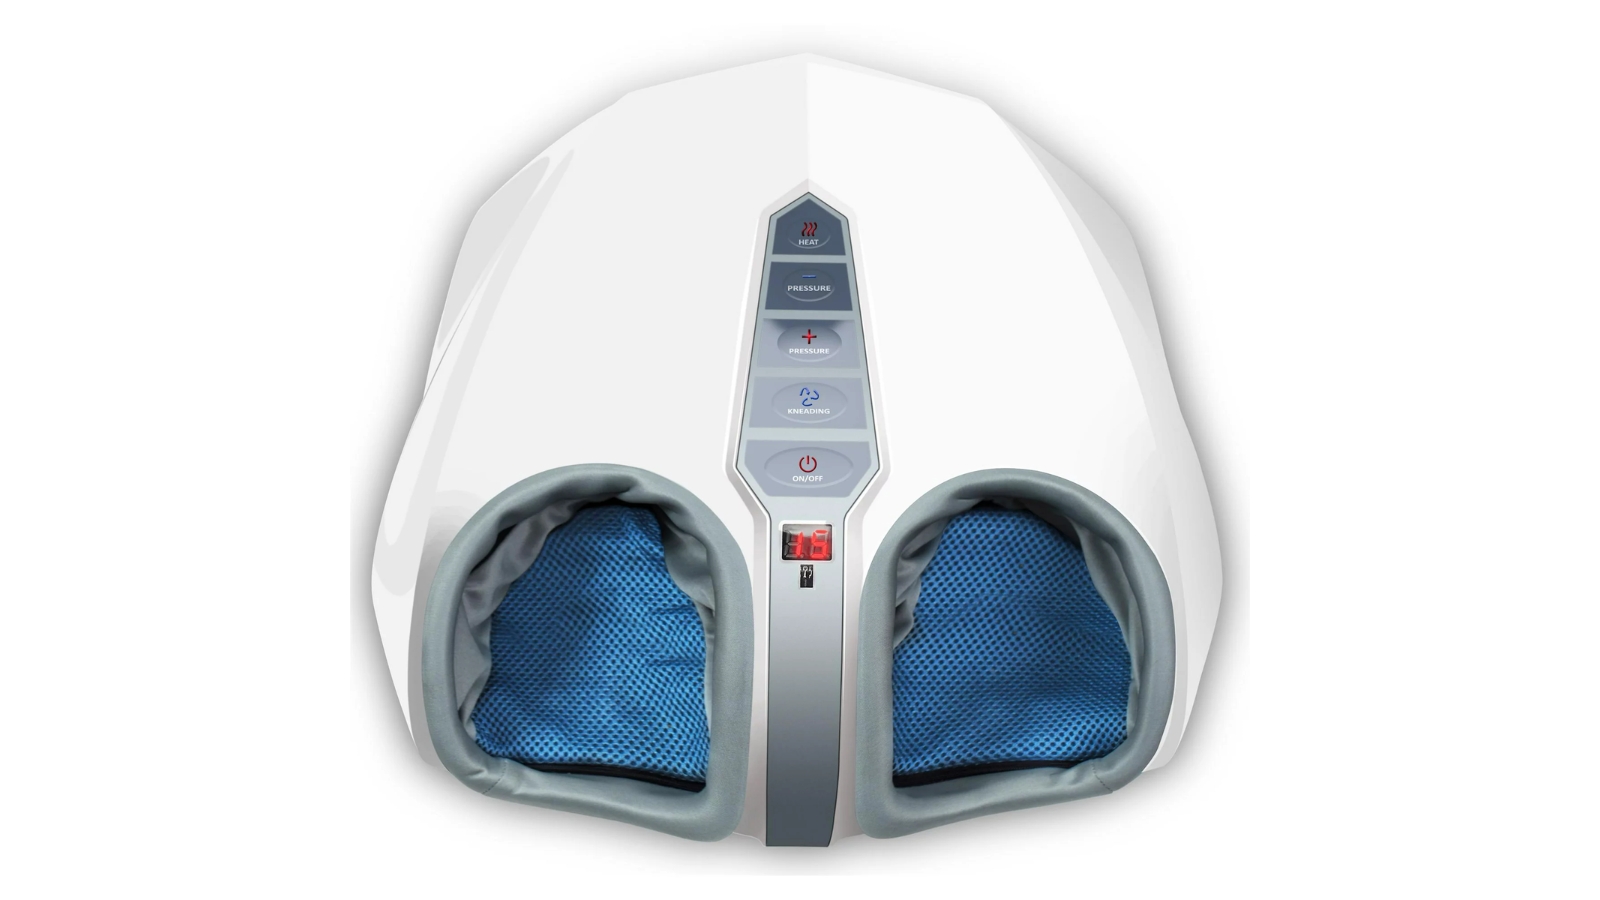 shiatsu-delivering foot massage machine with chambers for the bottom and sides of the feet